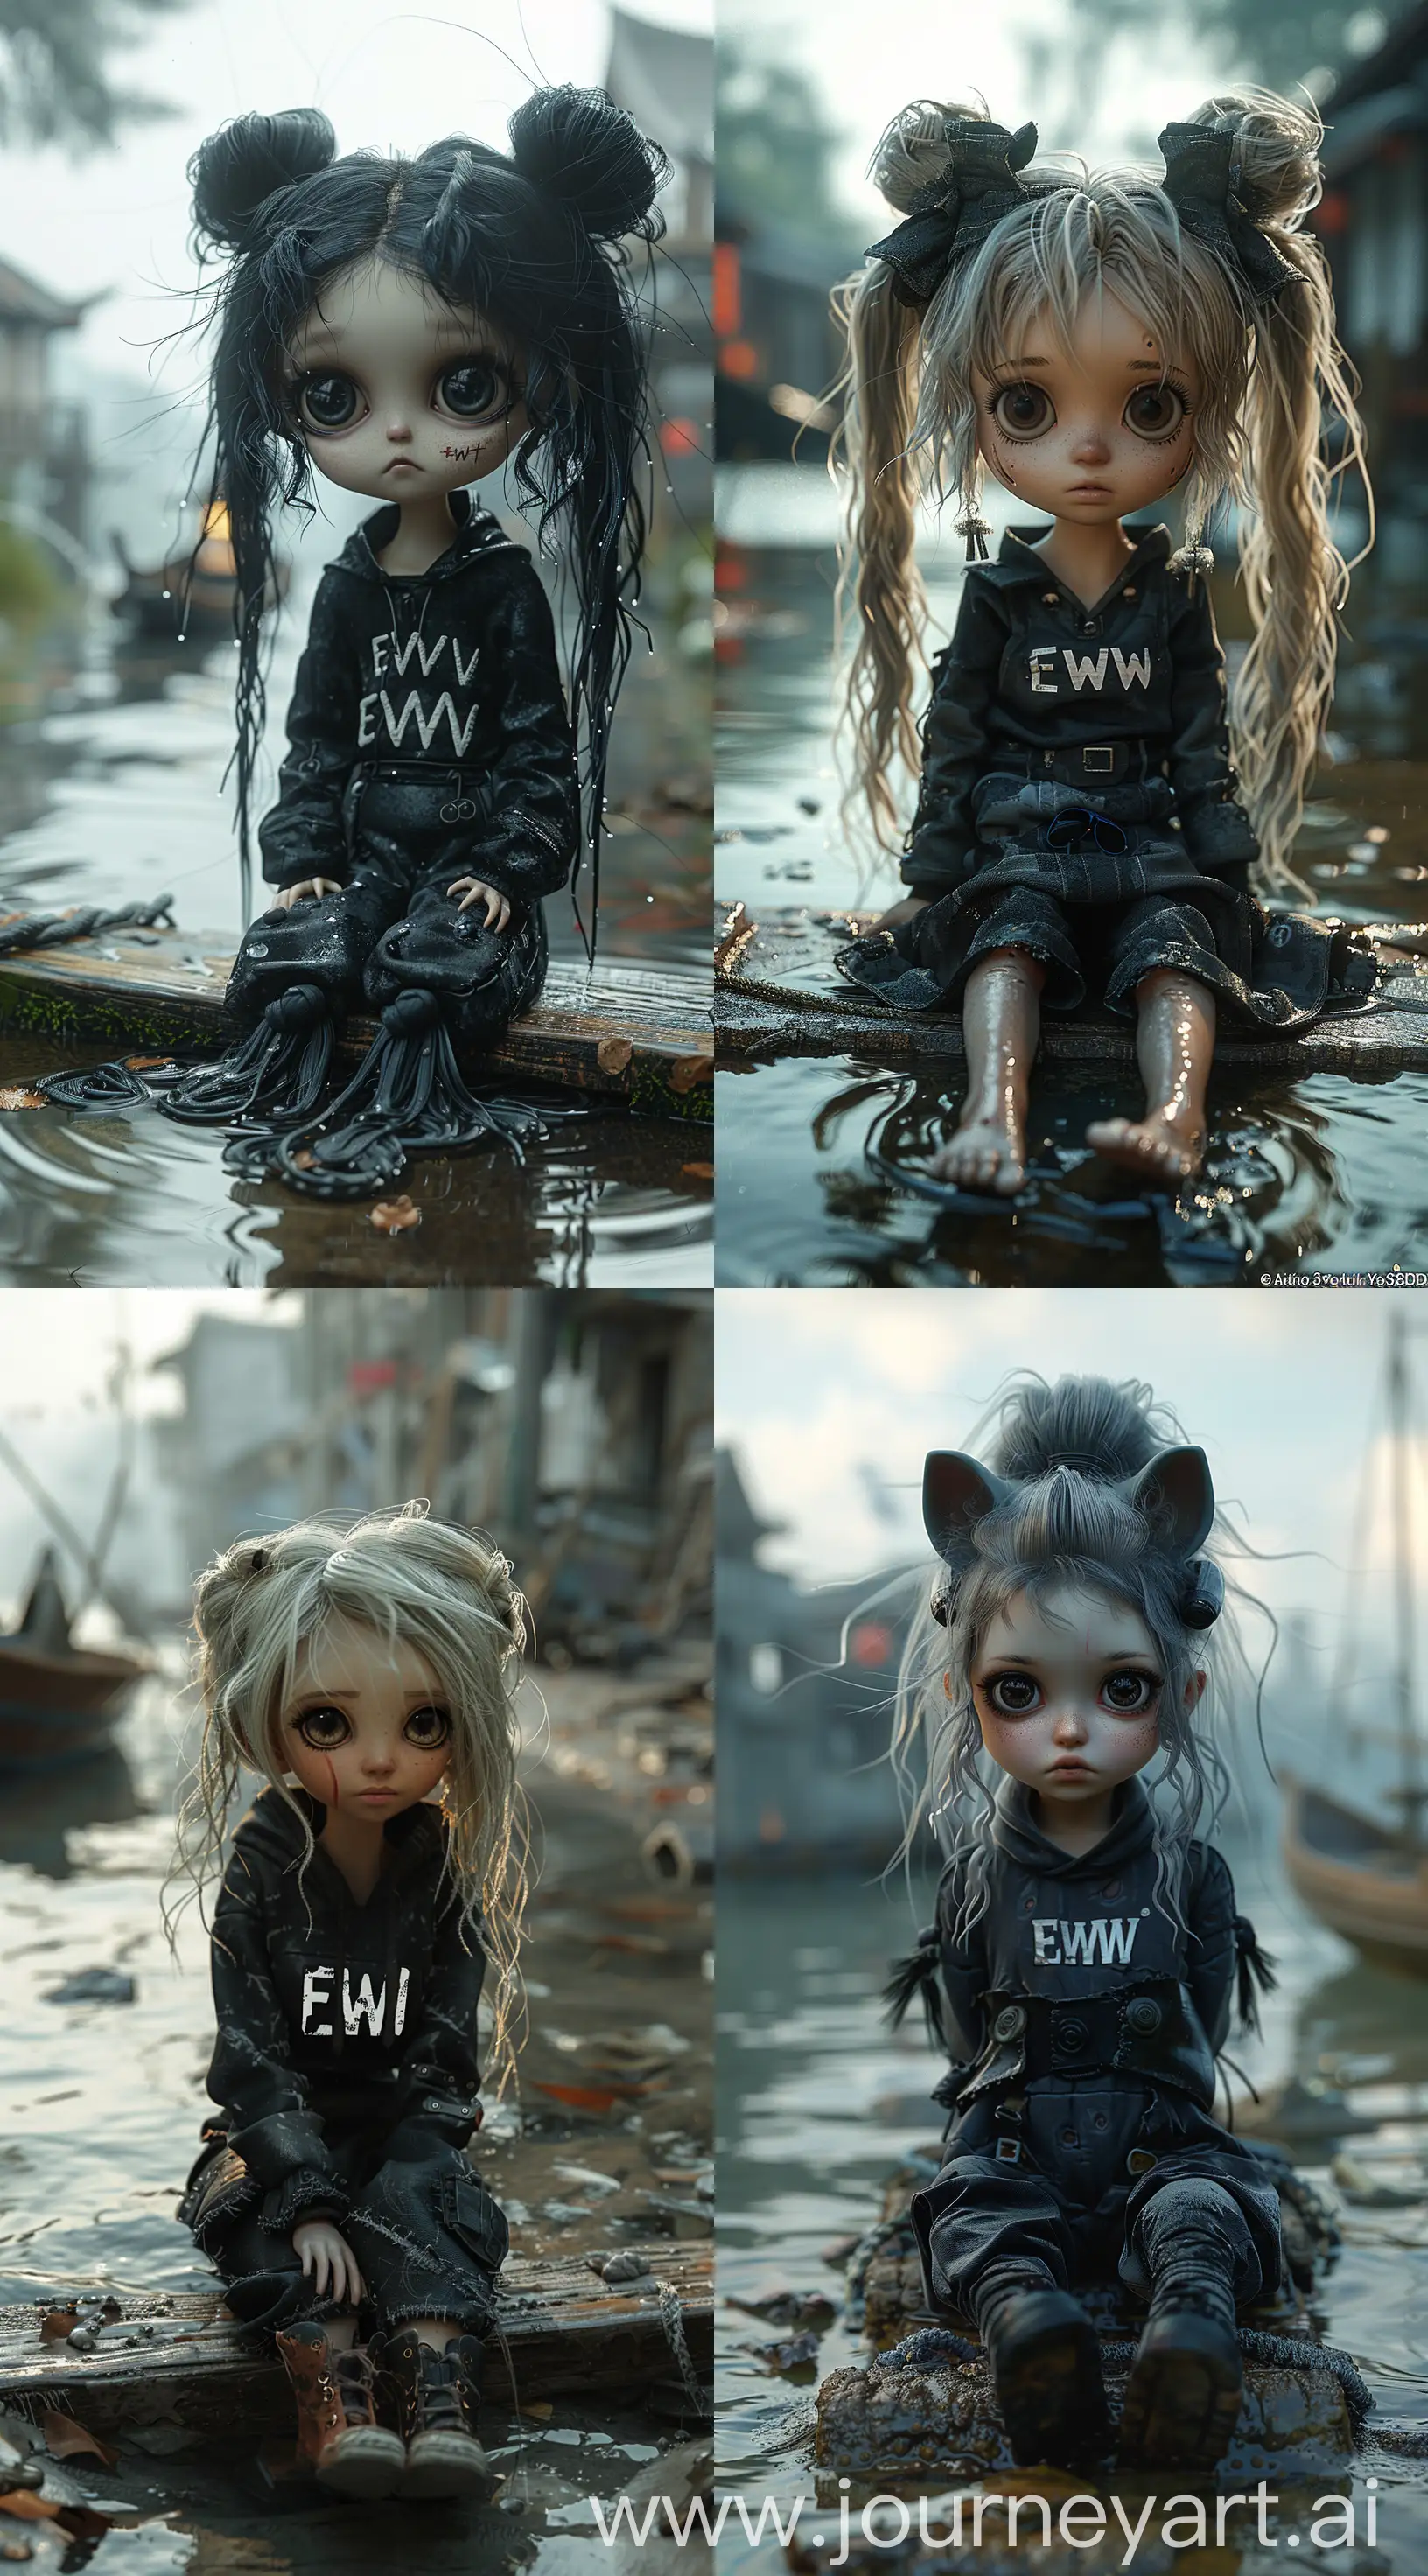 3d model of a small emo girl in black outfit with the inscription "EWW"  sitting on a footbrigde in the water, with flowing hair,  detailed big eyes, pale skin, a small boat in the background, detailed cinematic render, unreal engine art, akihiko yoshida. unreal engine, polycount contest winner, photorealistic dark concept art, 32k uhd --ar 71:128 --stylize 750